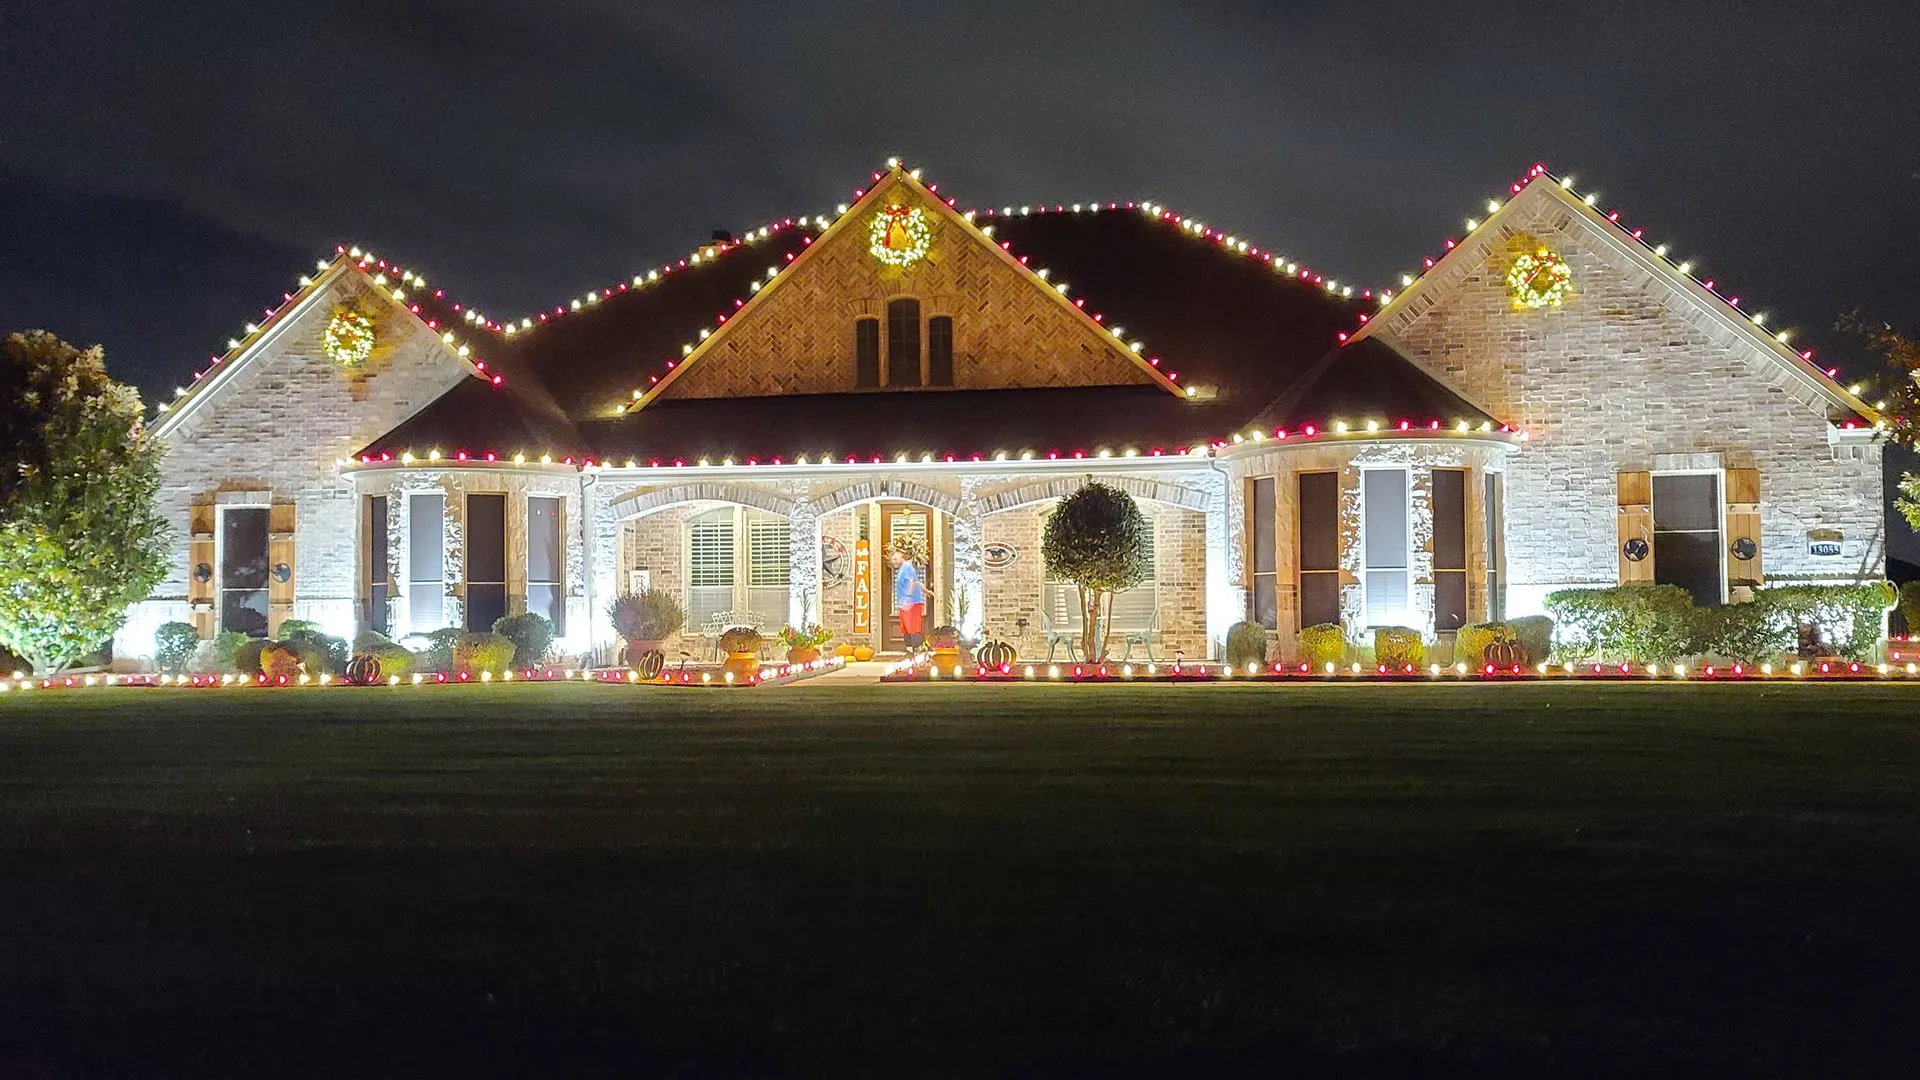 Make Your Life Easier by Hiring Professionals to Install Your Holiday Lights